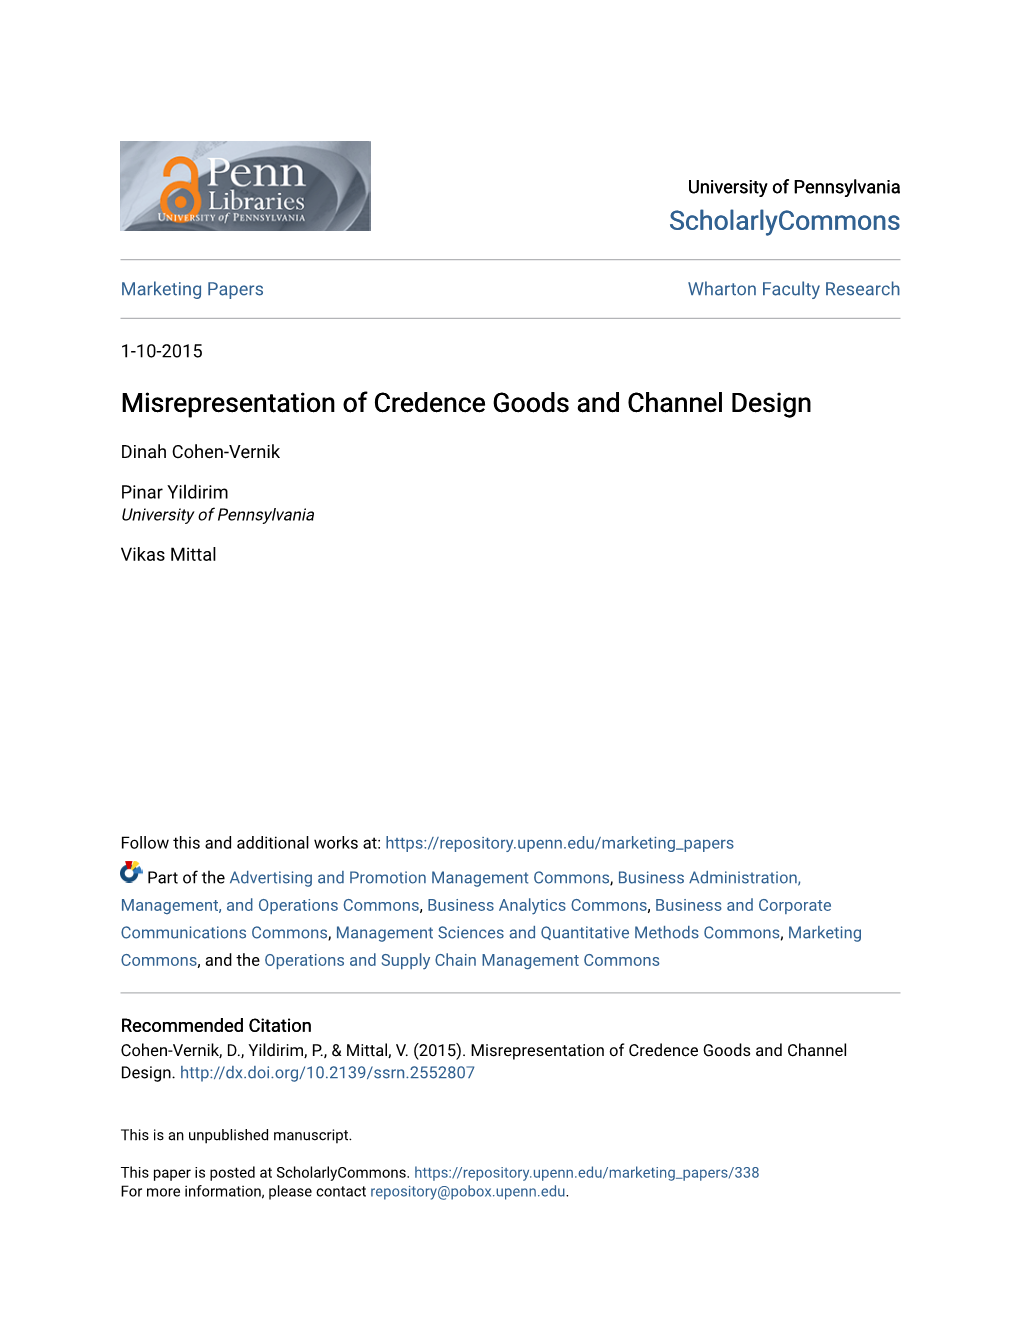 Misrepresentation of Credence Goods and Channel Design